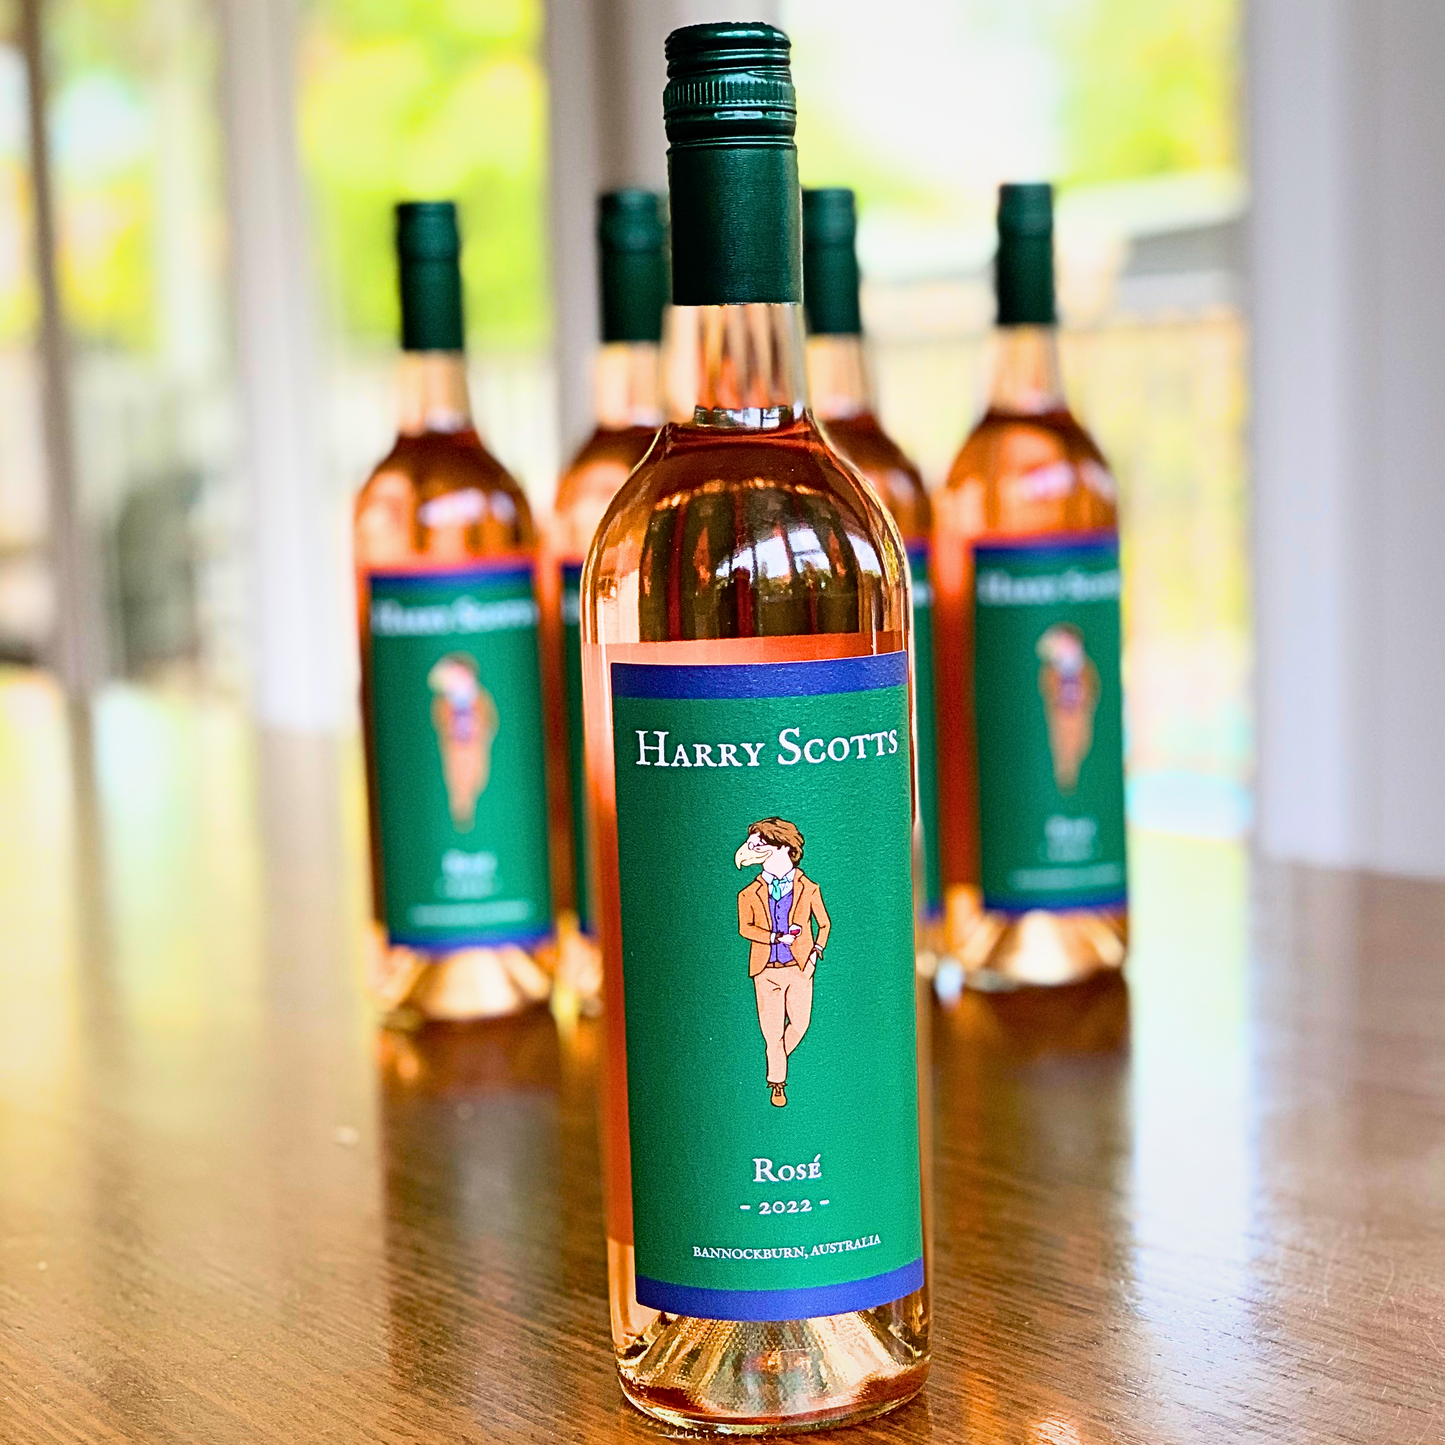 Special Harry Scotts Rosé Mixed Case Launch Deal (free delivery included)